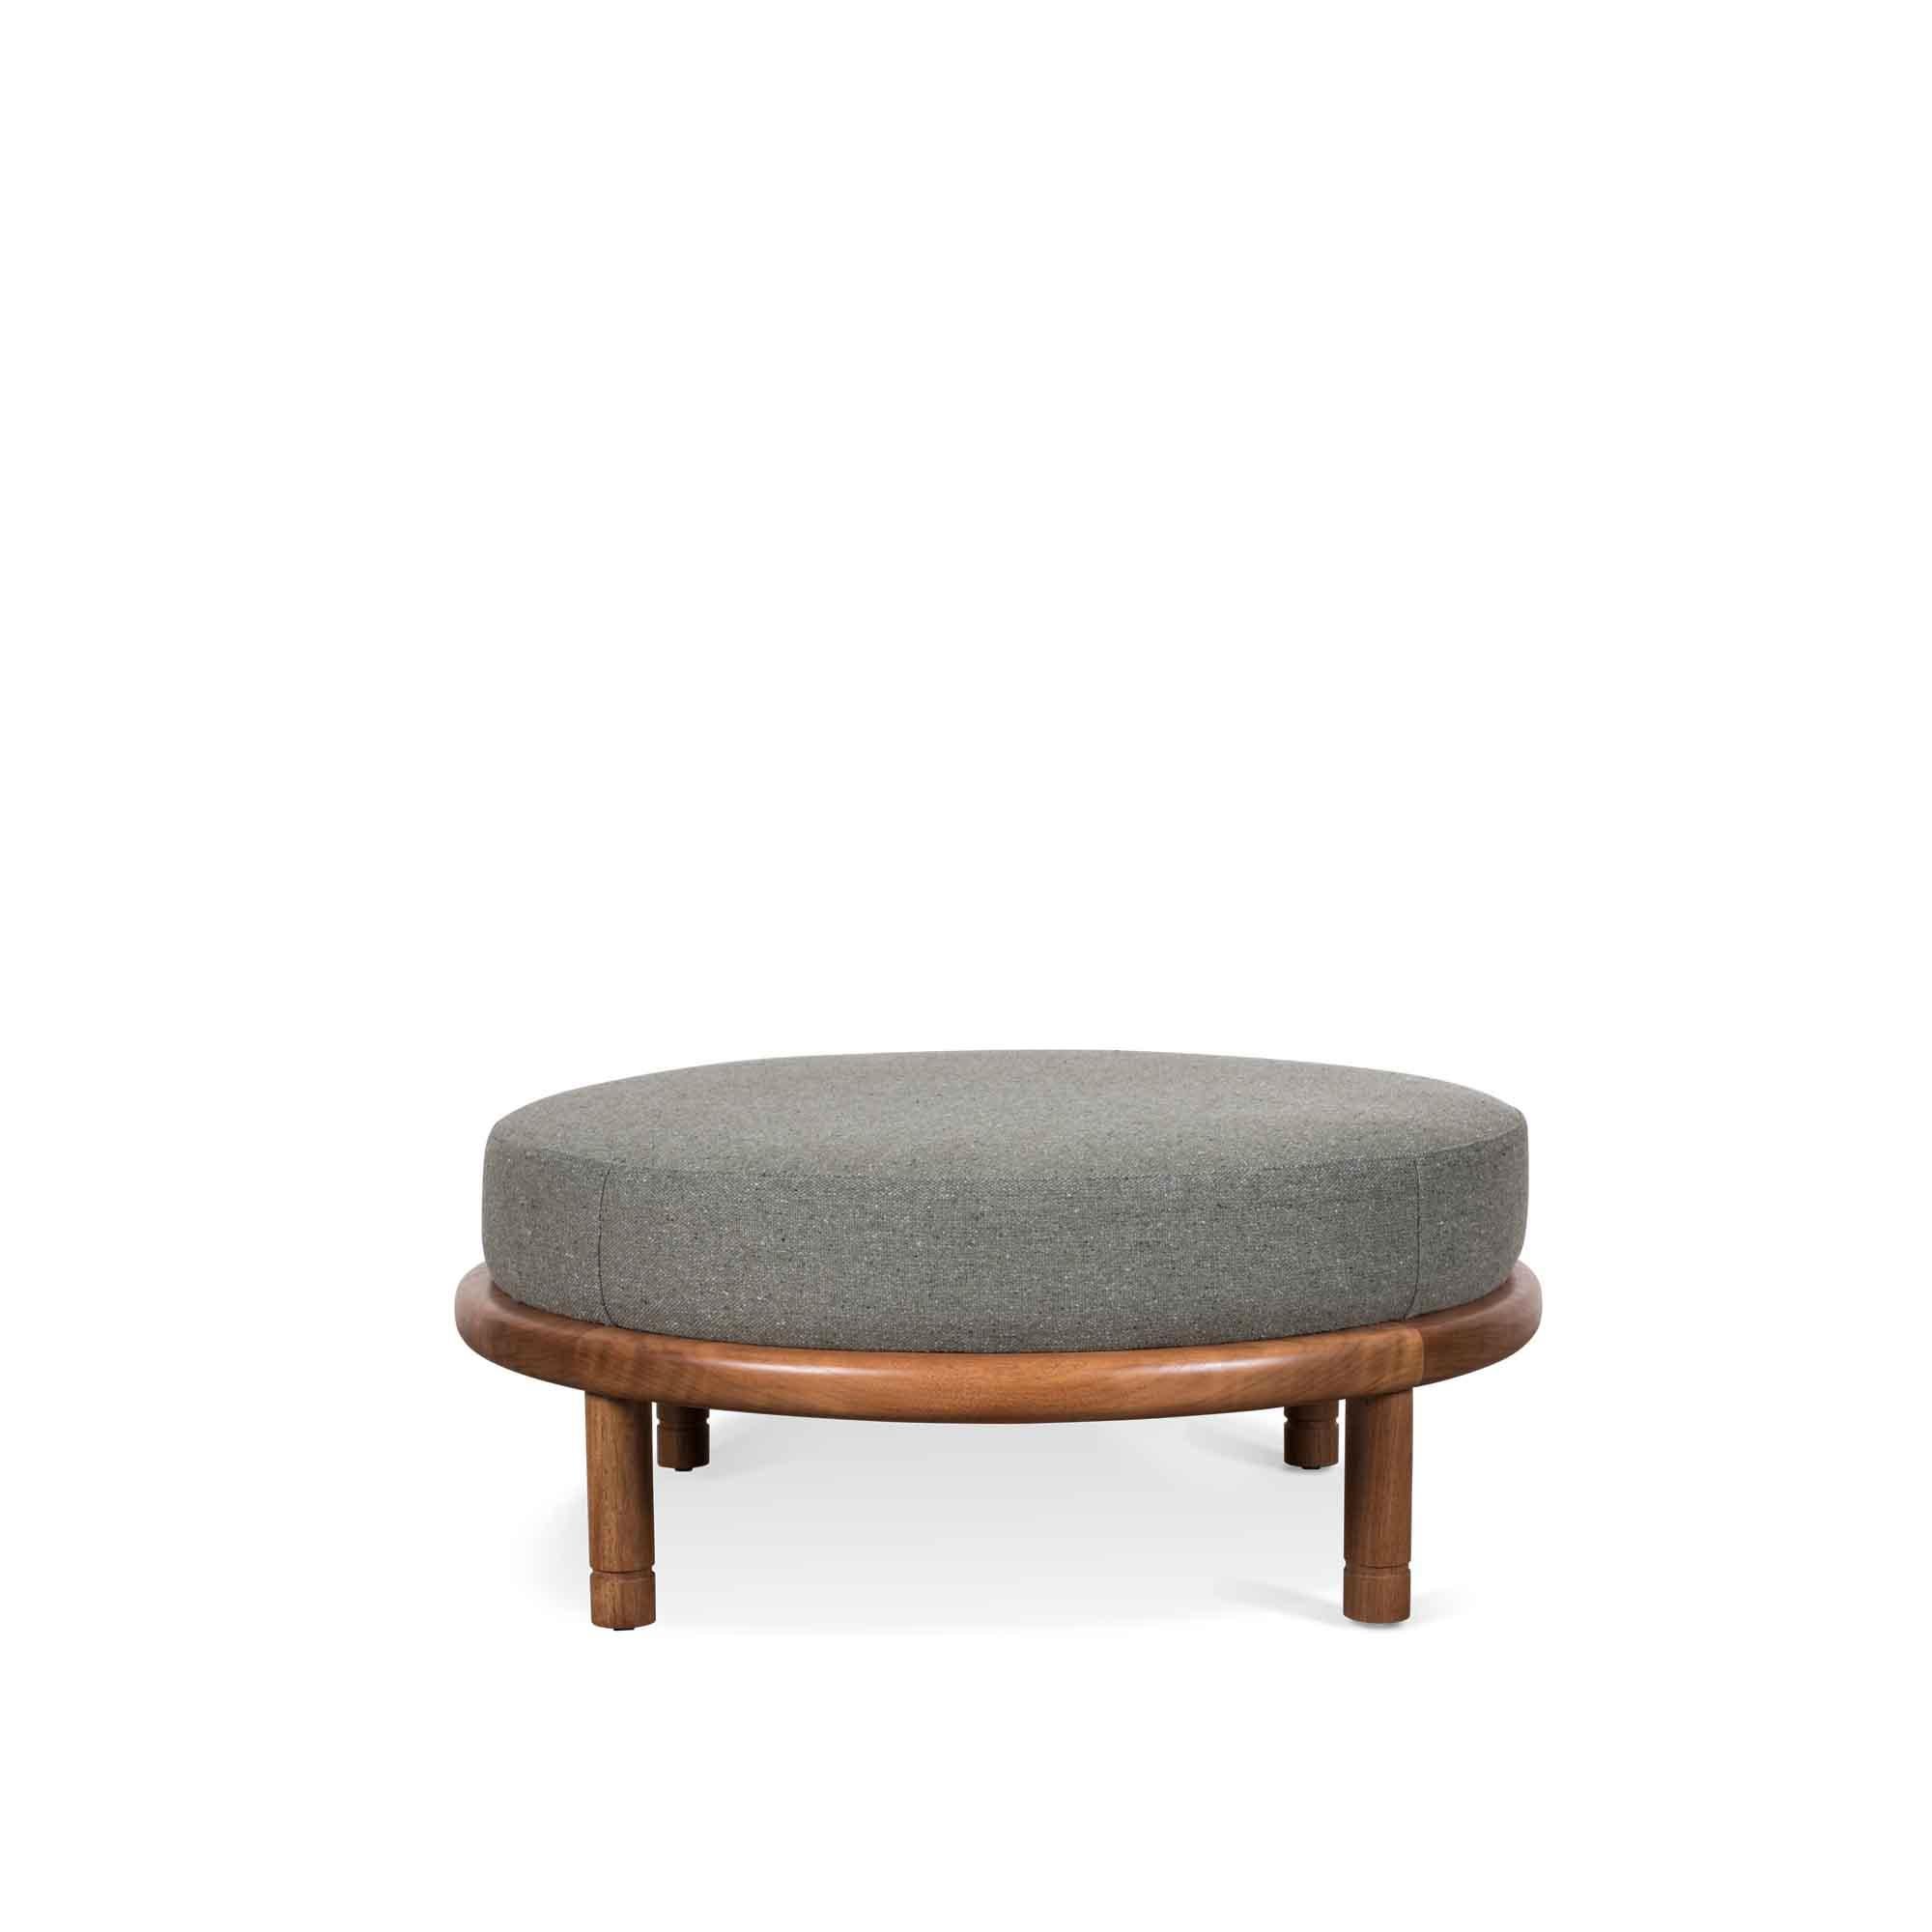 Walnut Moreno ottoman by Lawson-Fenning. The Moreno Ottoman features a round solid wood base with four cylindrical legs and an upholstered top. Available in American walnut or white oak. 

 